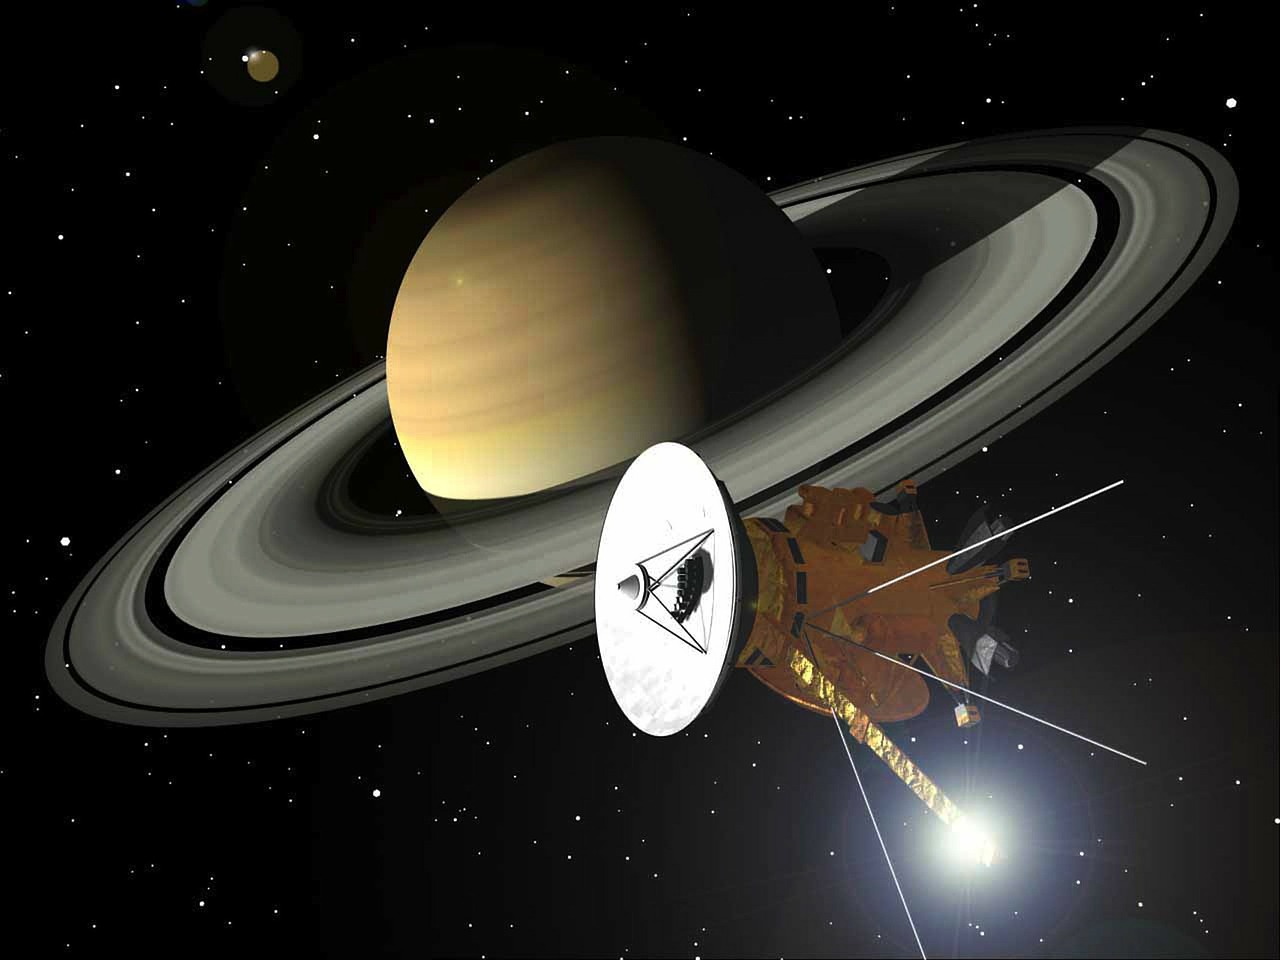 What are notable facts about Saturn?